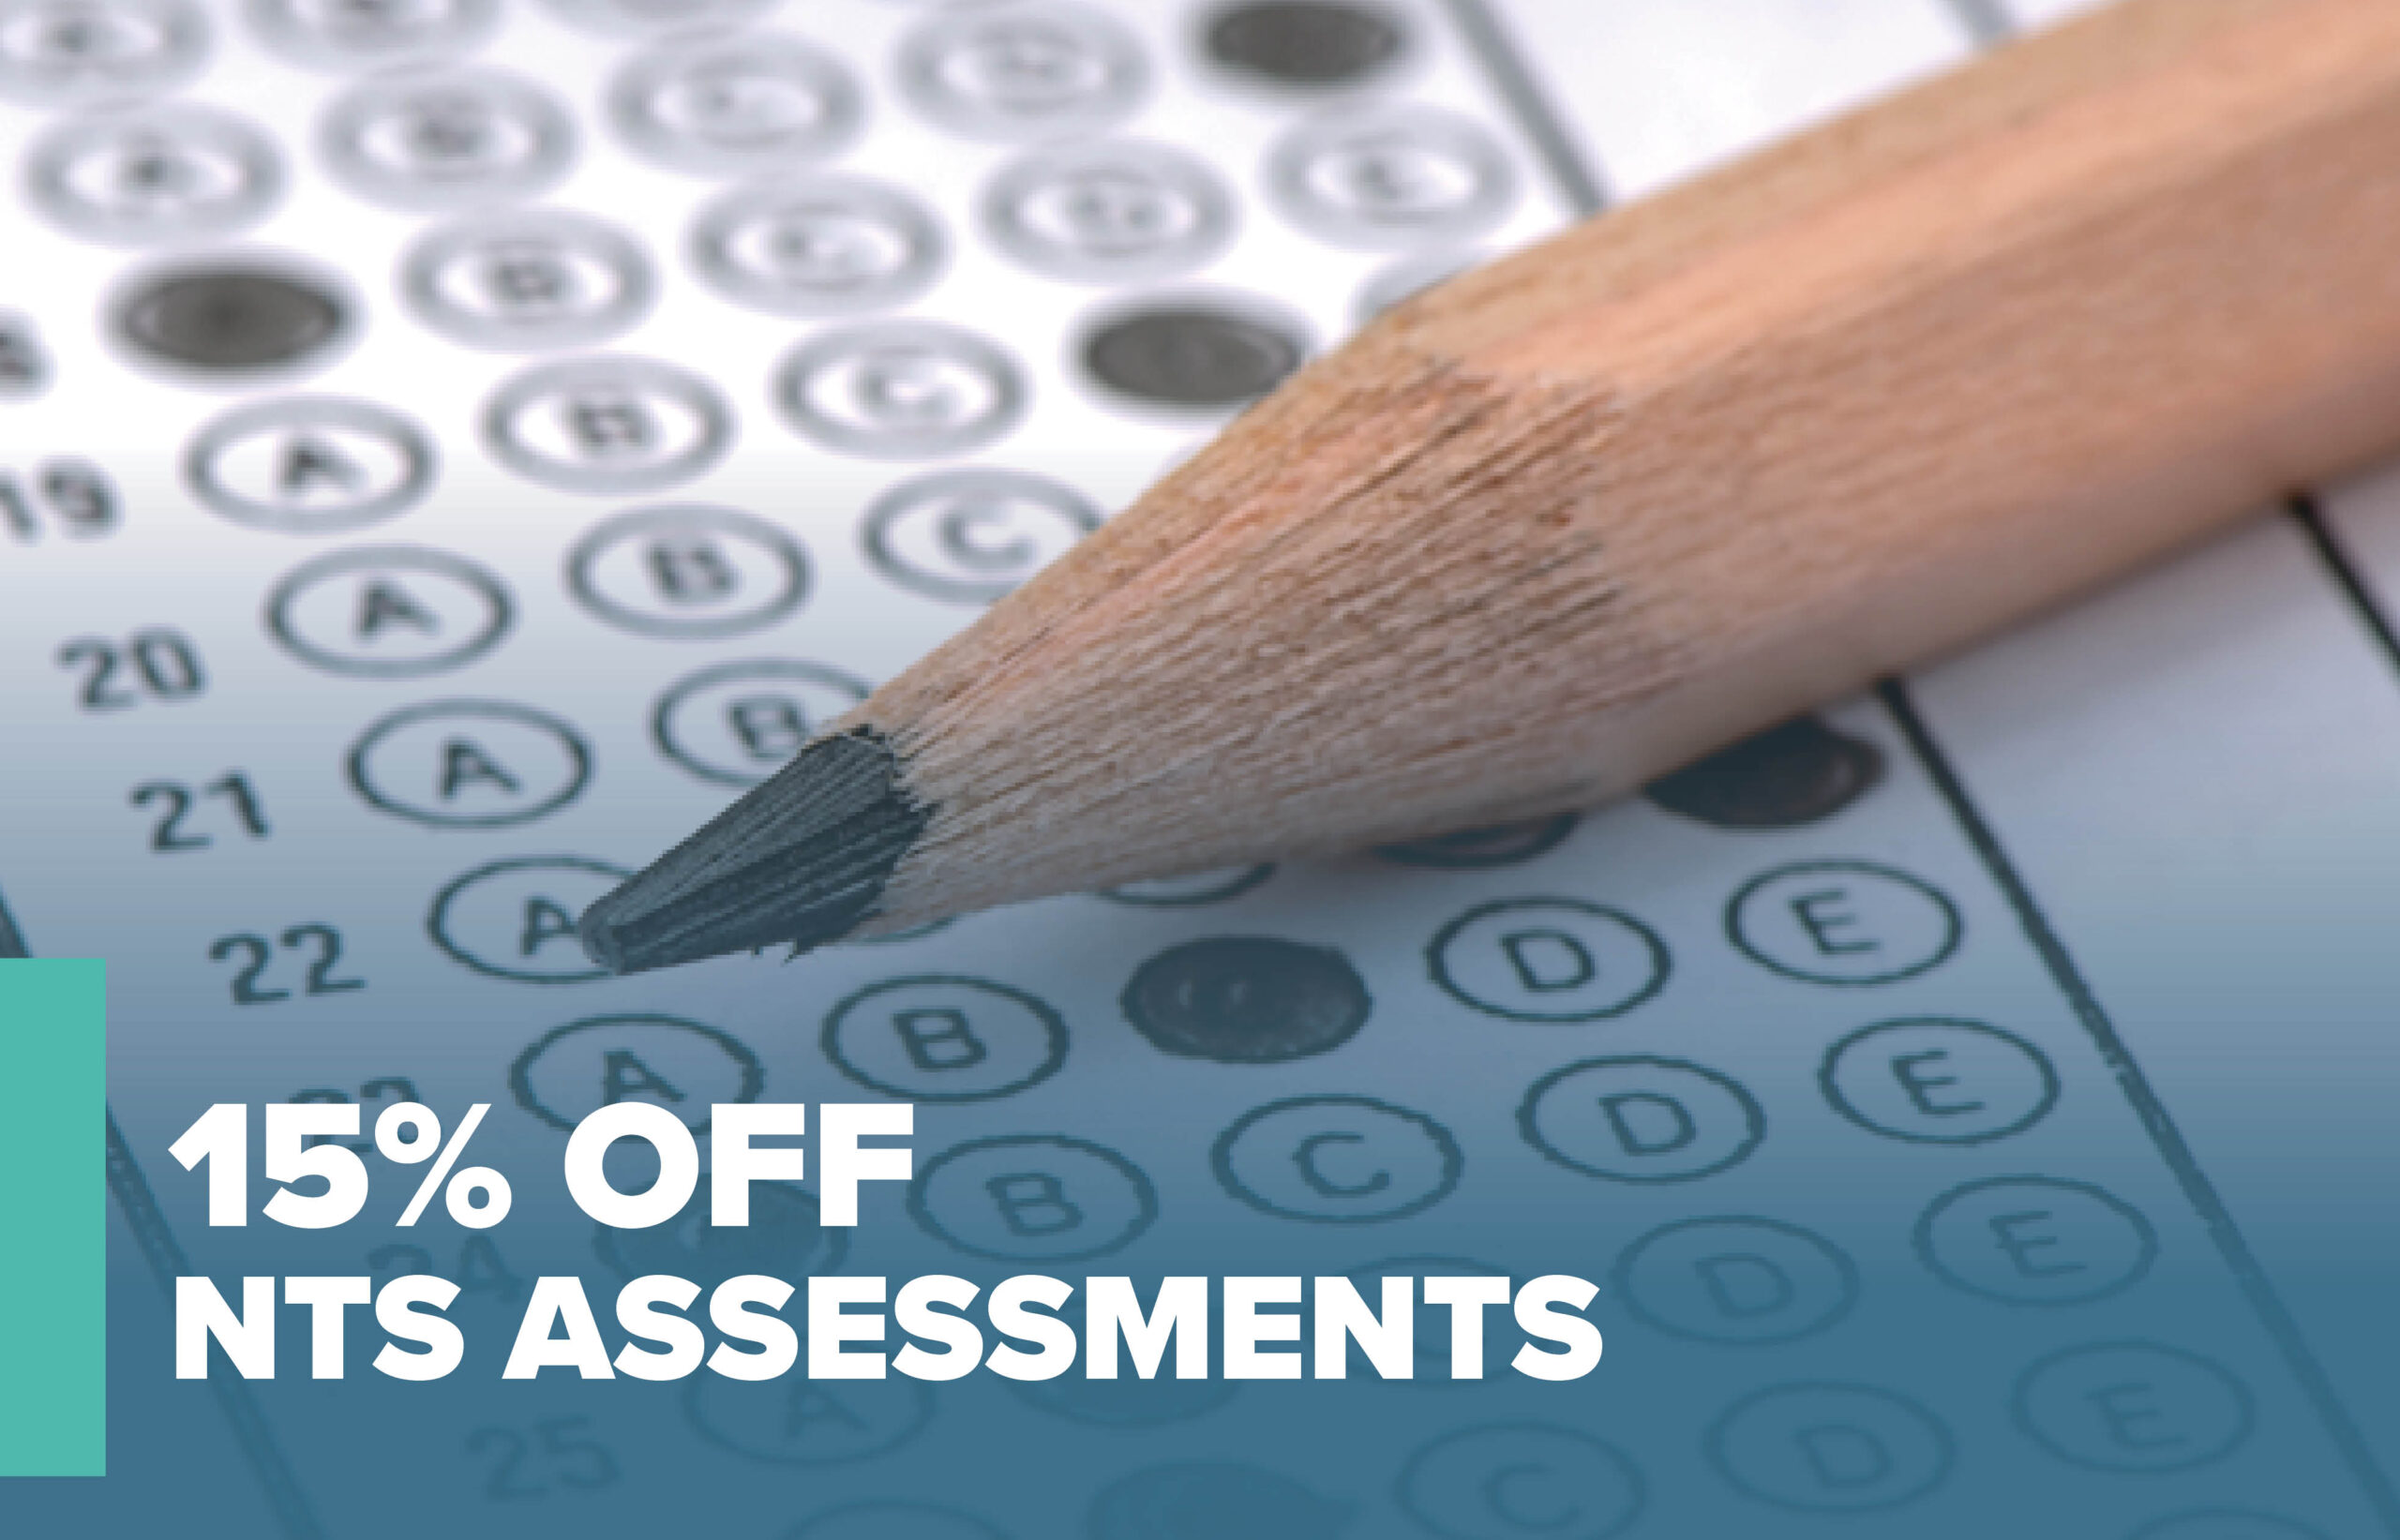 Save 15% on Assessment Exams in March